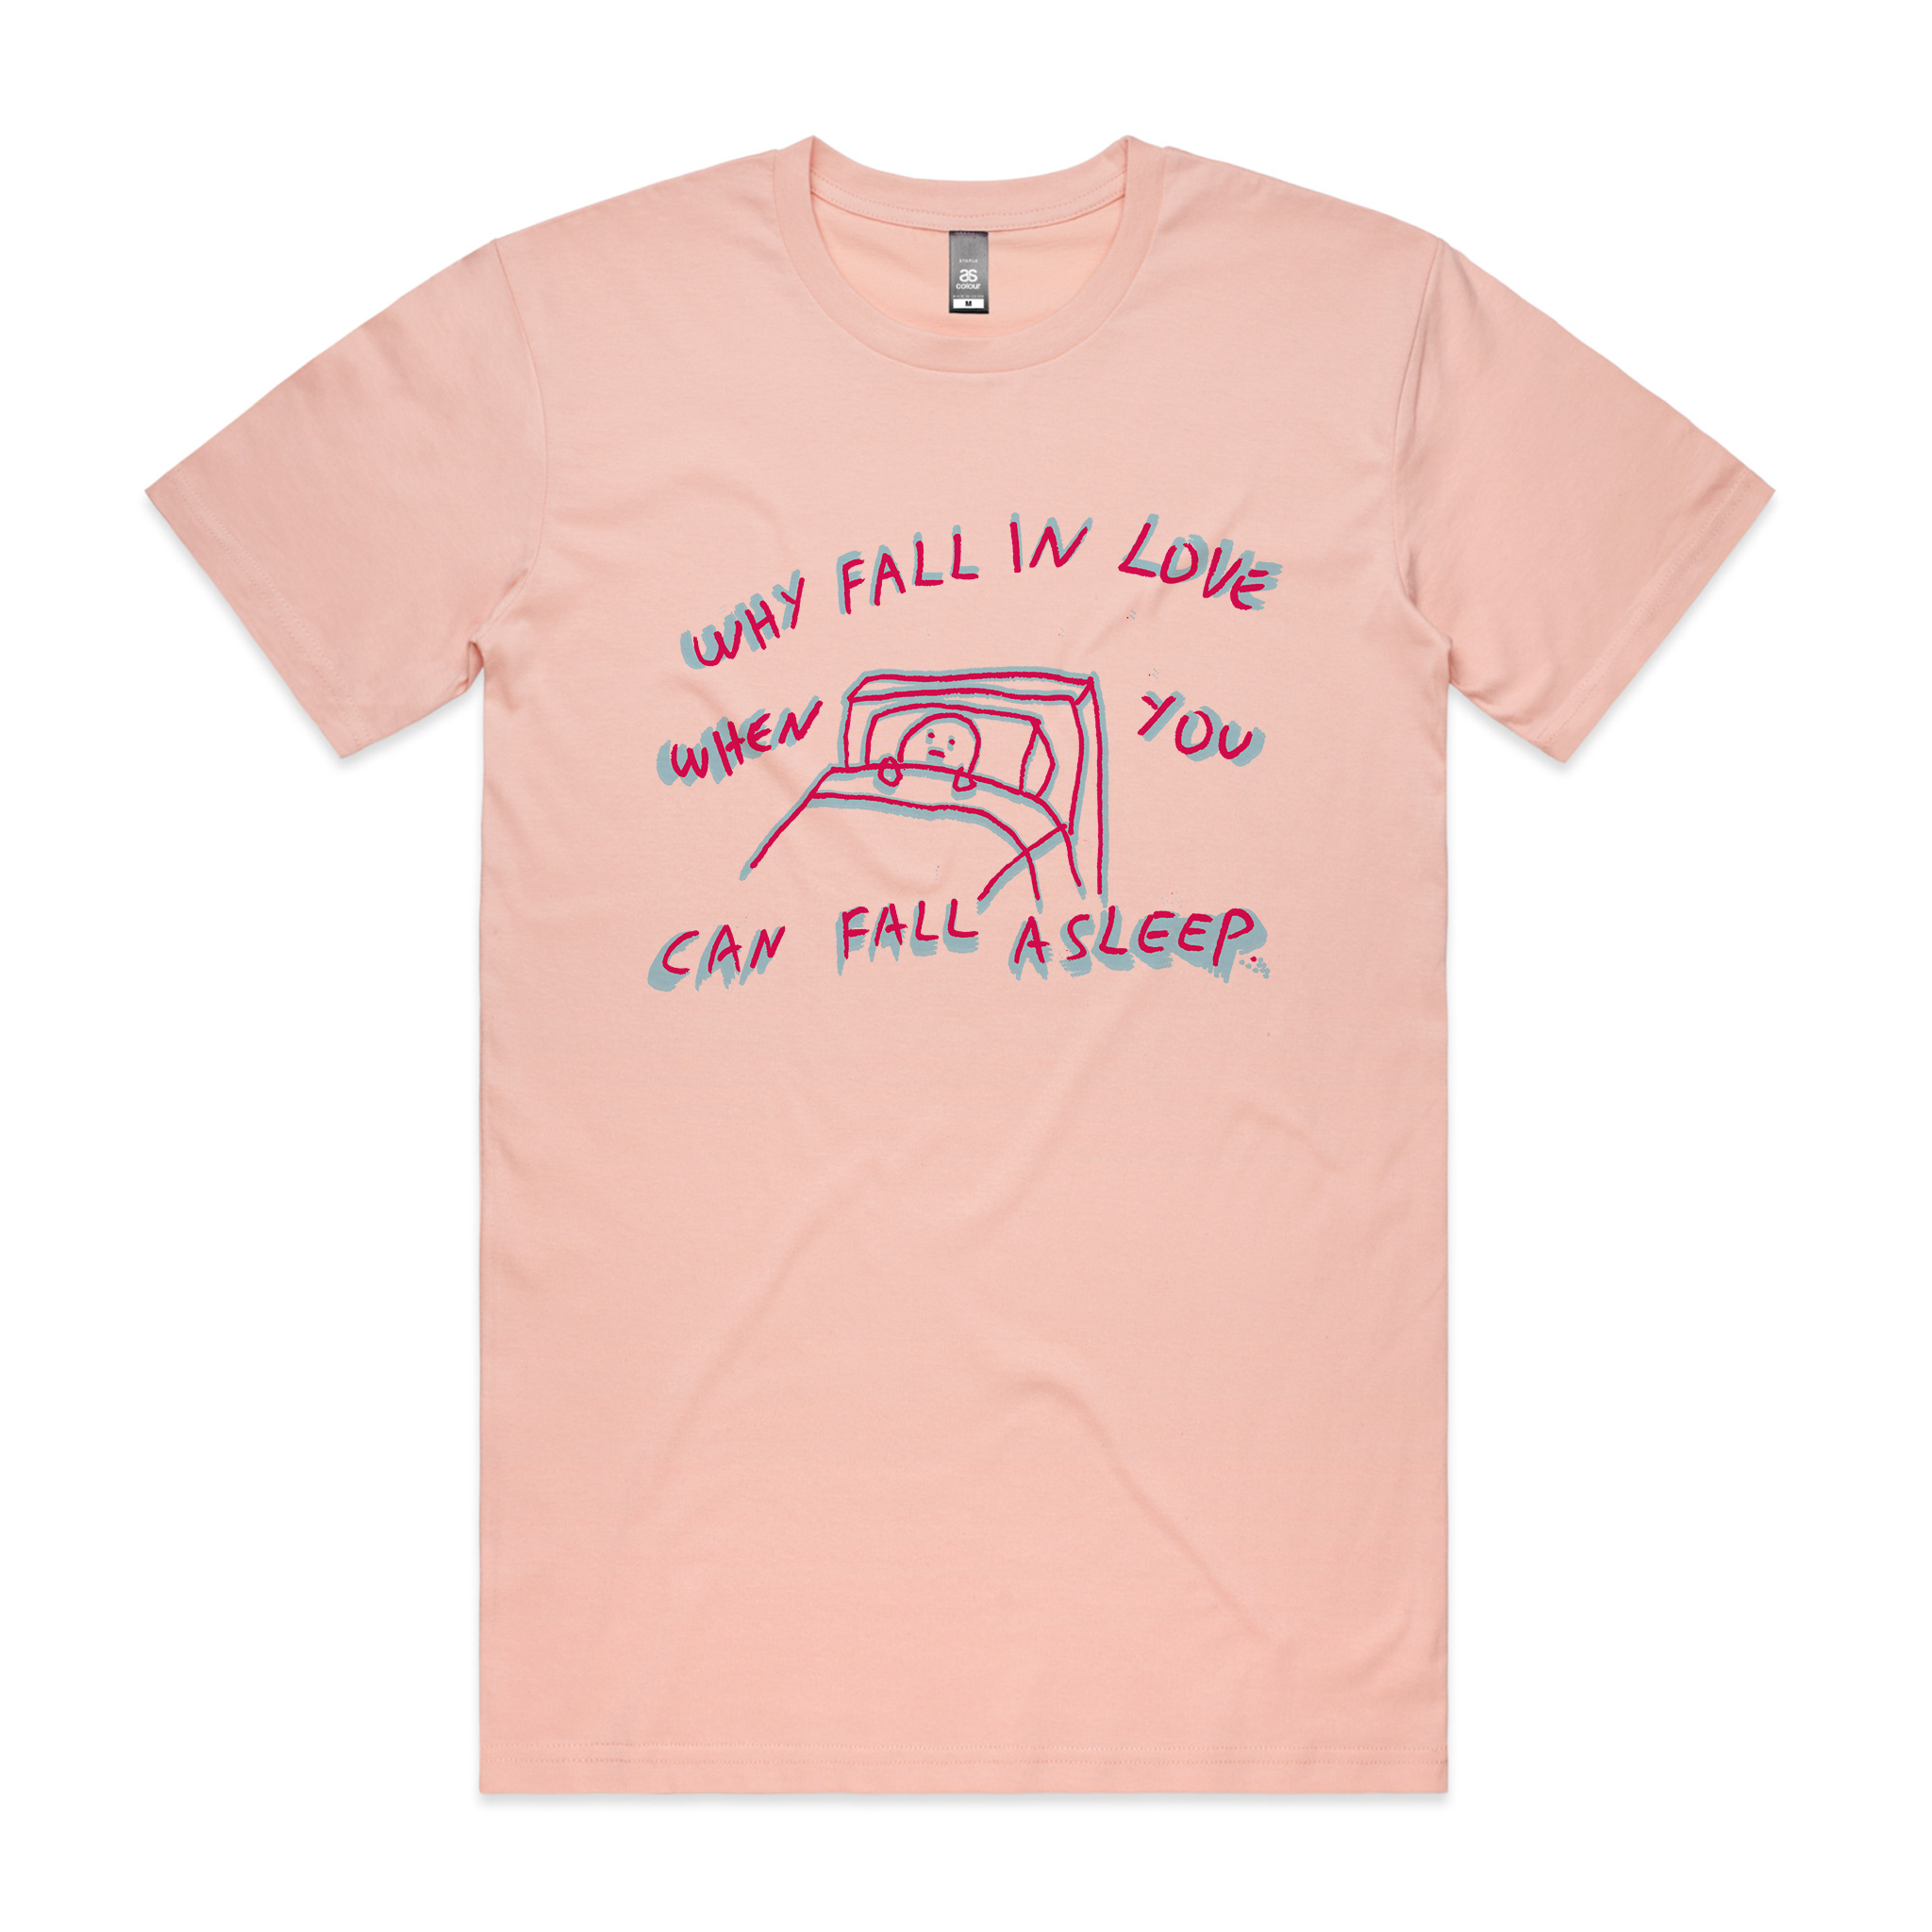 Why Fall In Love Tee